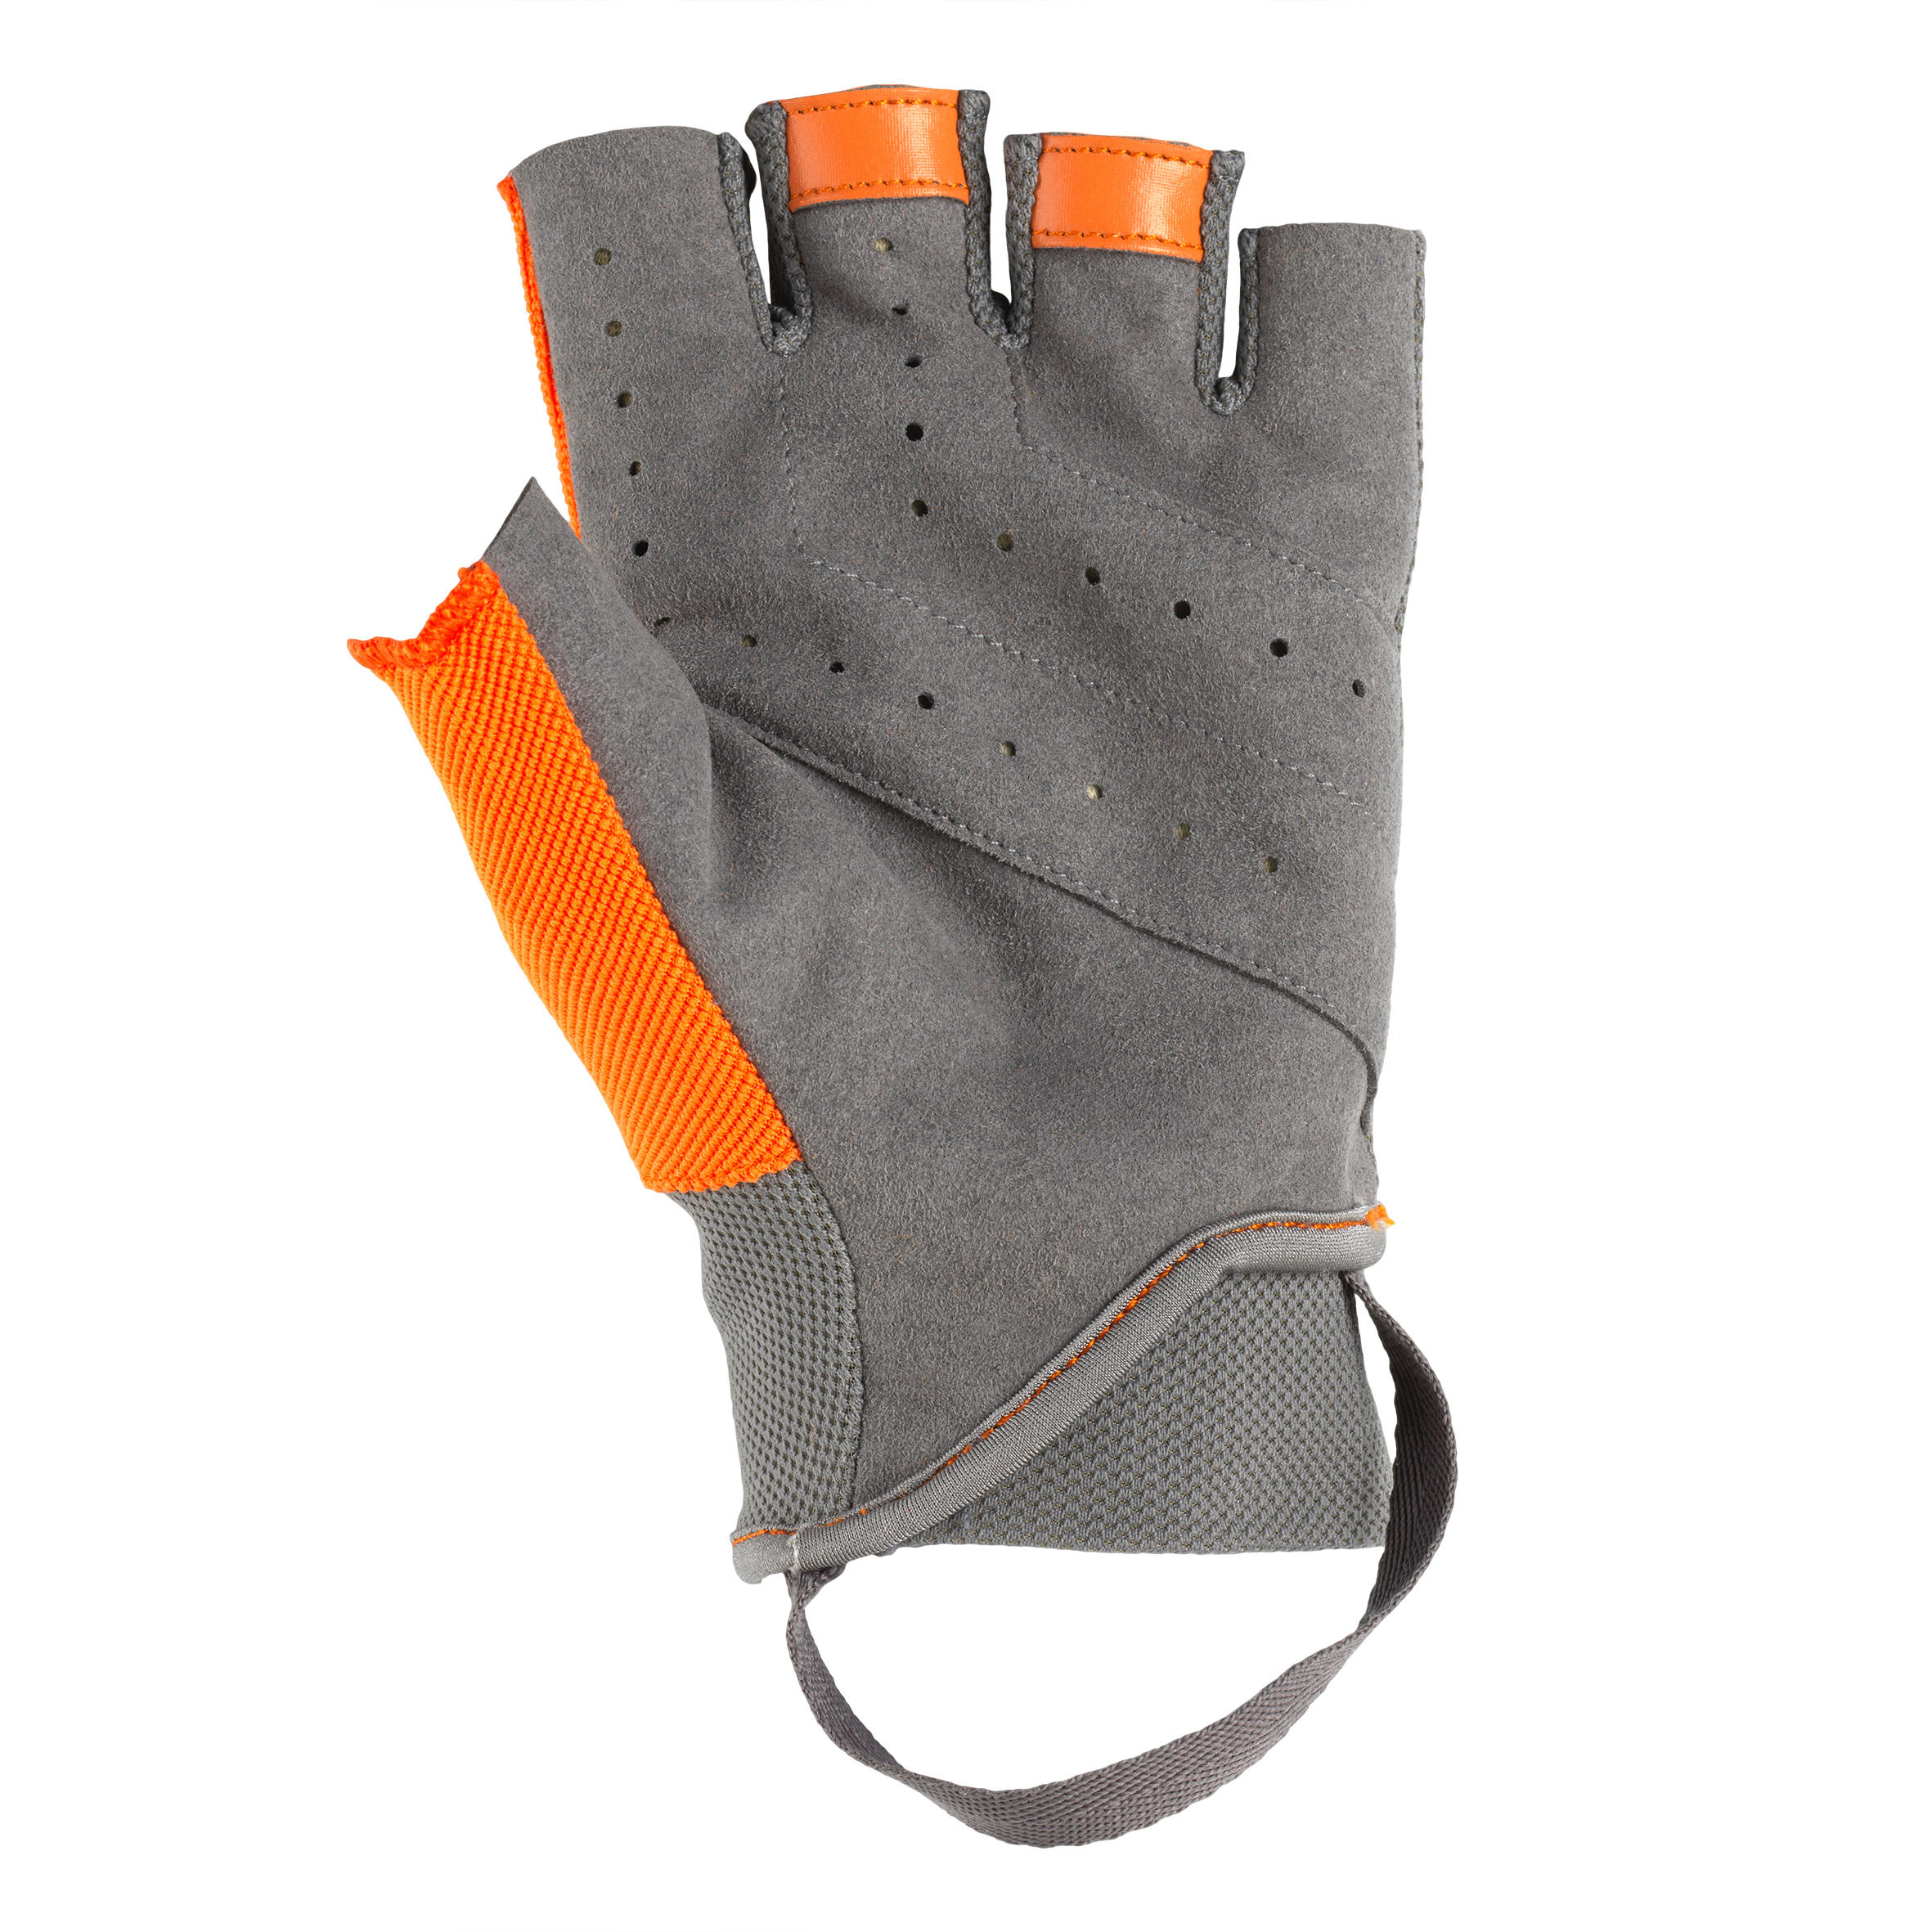 CLAY PIGEON SHOOTING MITTS - GREY, SOLOGNAC 2/9